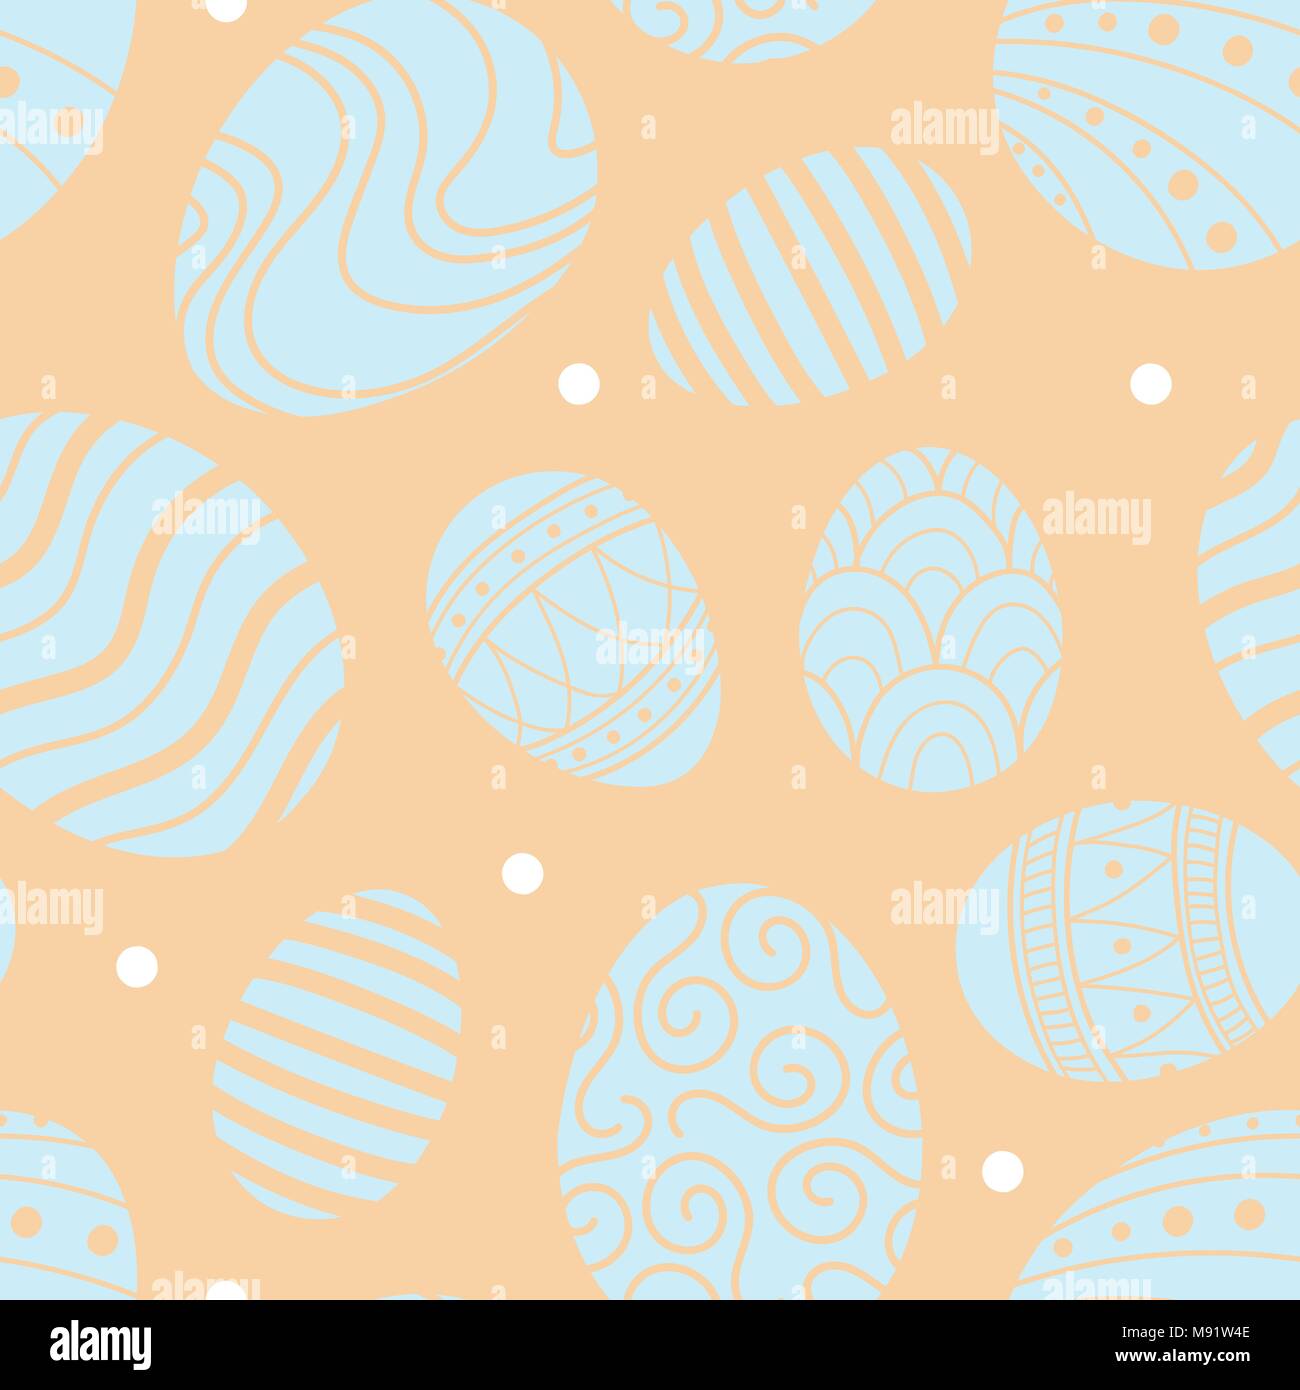 Easter eggs in blue silhouette and pastel pink dots random on pink background. Cute hand drawn seamless pattern design for Easter festival in vector i Stock Vector